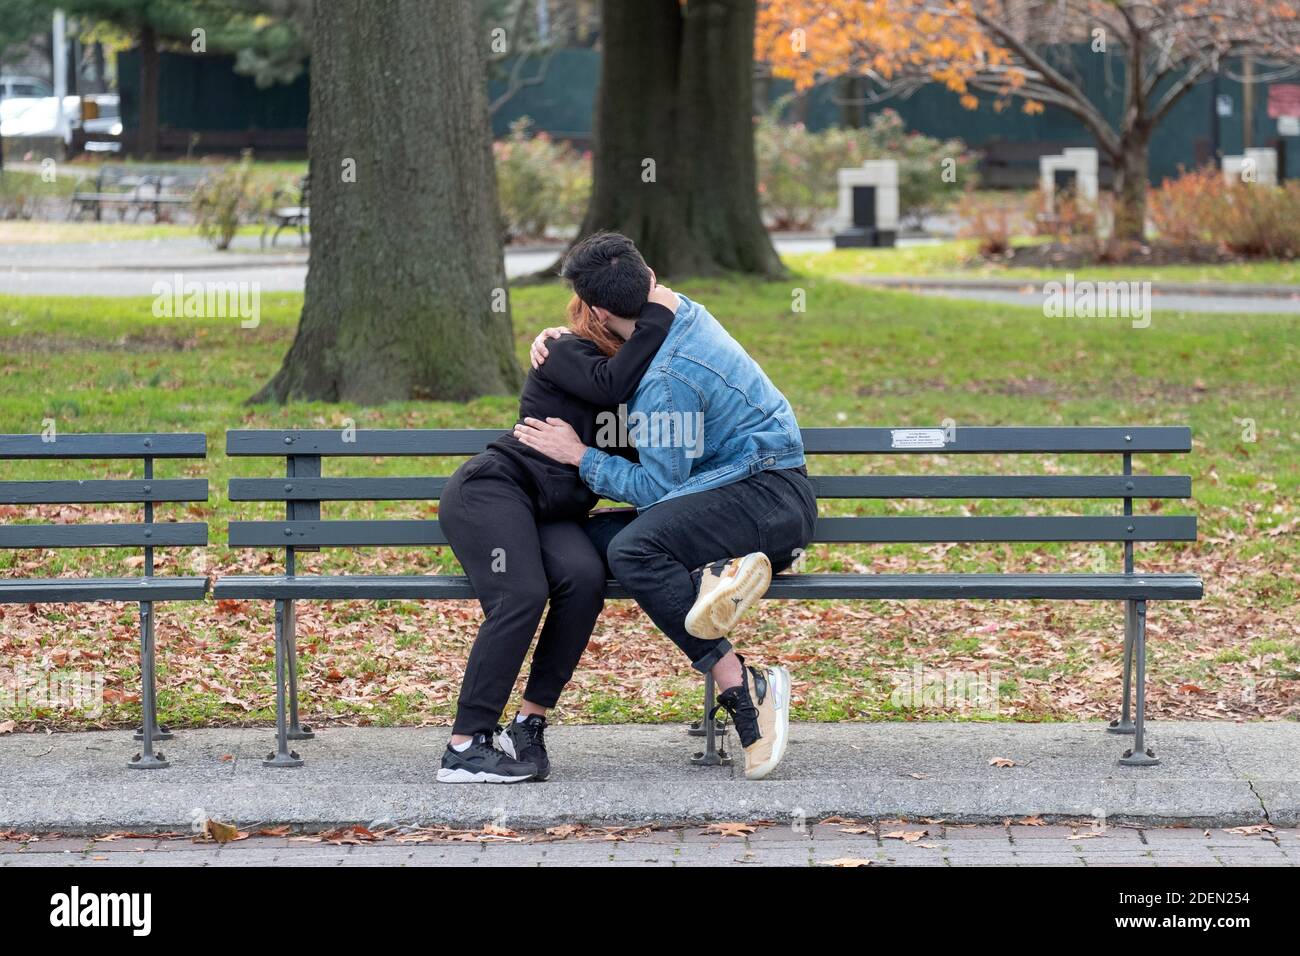 An unidentifiable couple embrace and kiss on a mild autumn day. In Flushing Meadows Corona Park in Queens, New York. Stock Photo